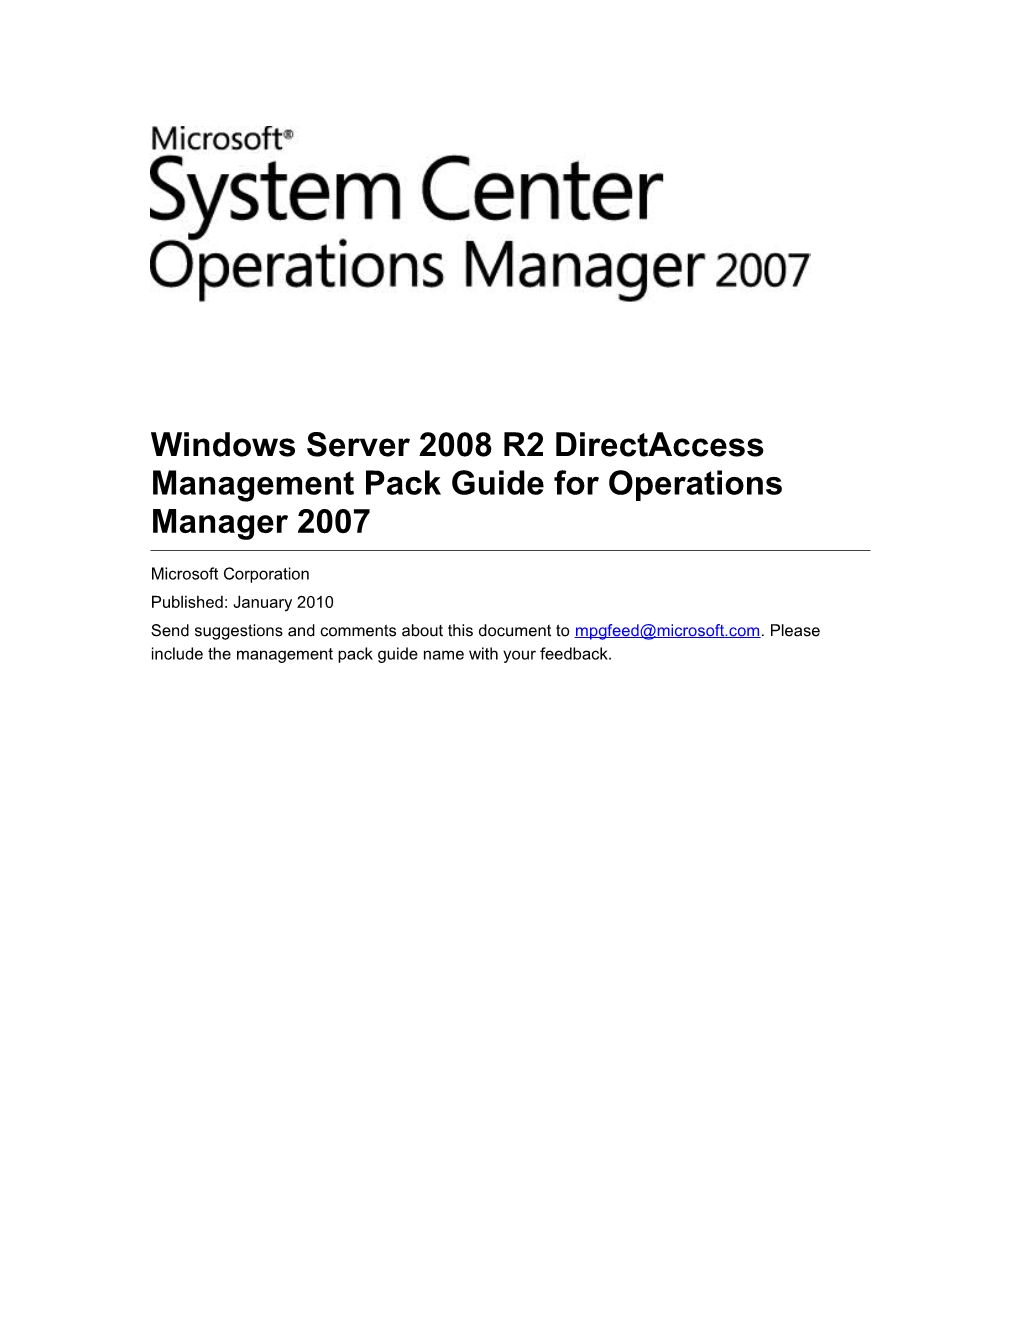 Windows Server 2008 R2 Directaccess Management Pack Guide for Operations Manager 2007